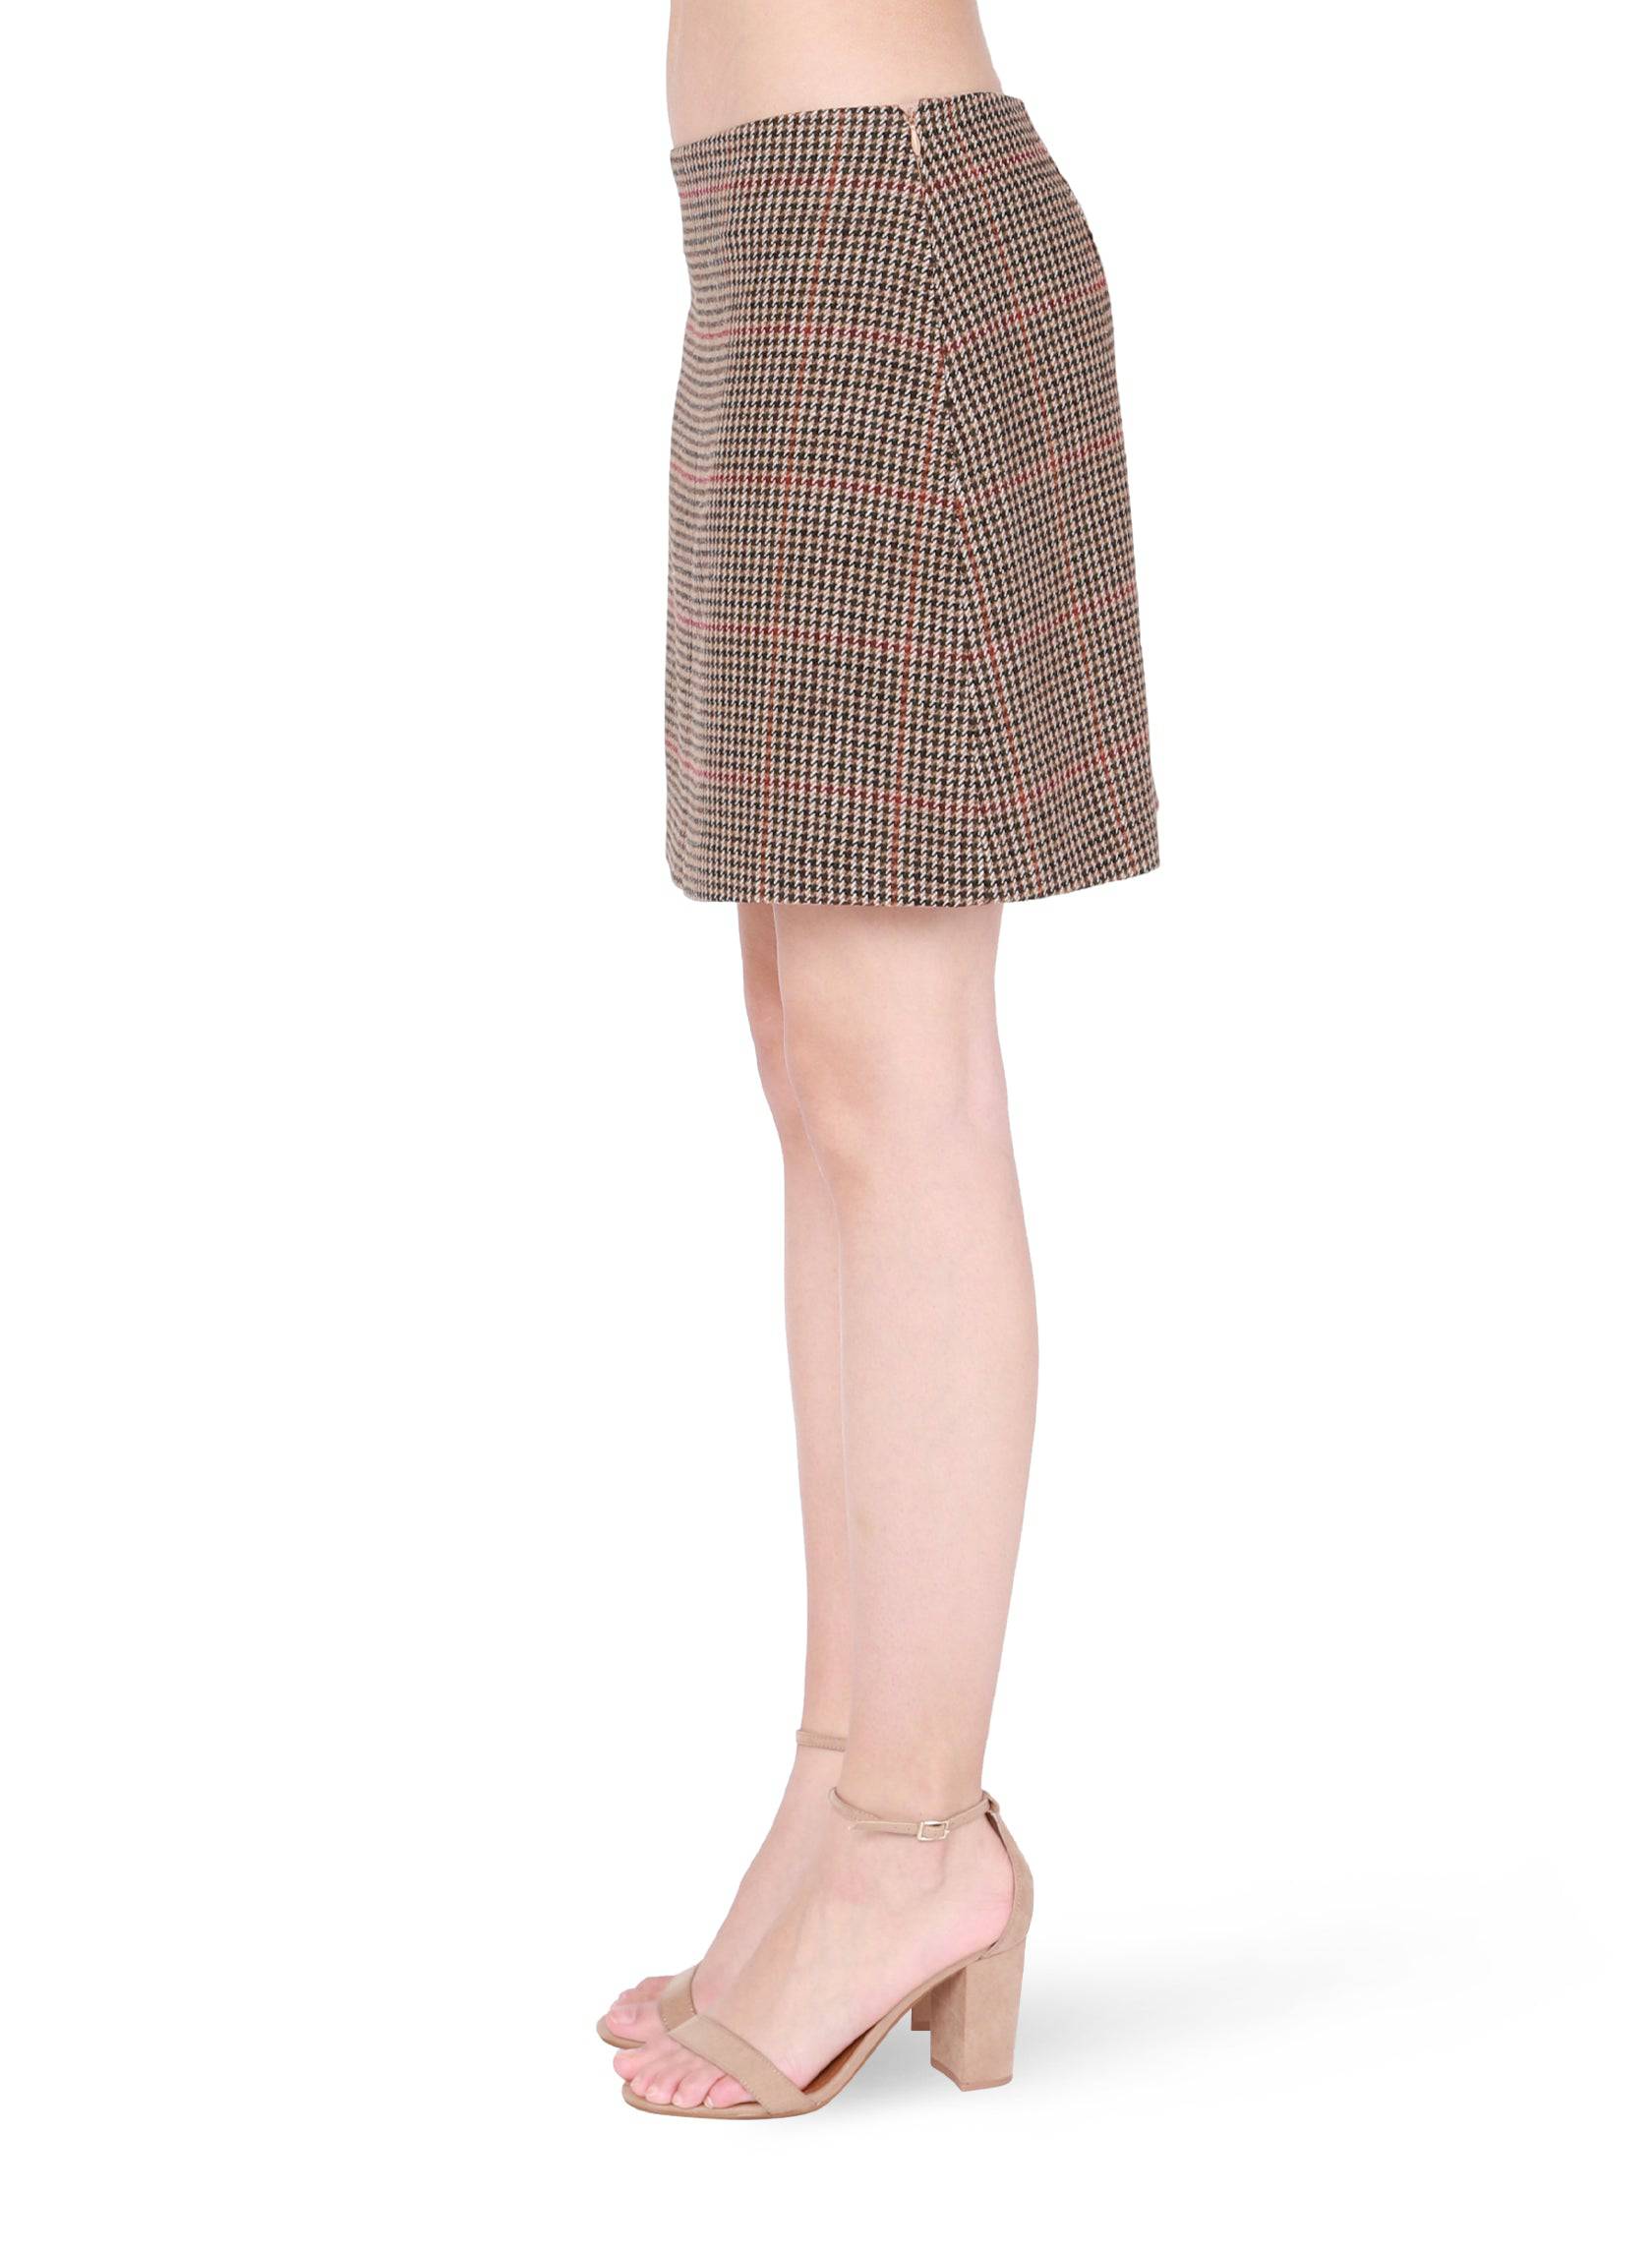 Houndstooth Mini Skirt - Out of the Blue